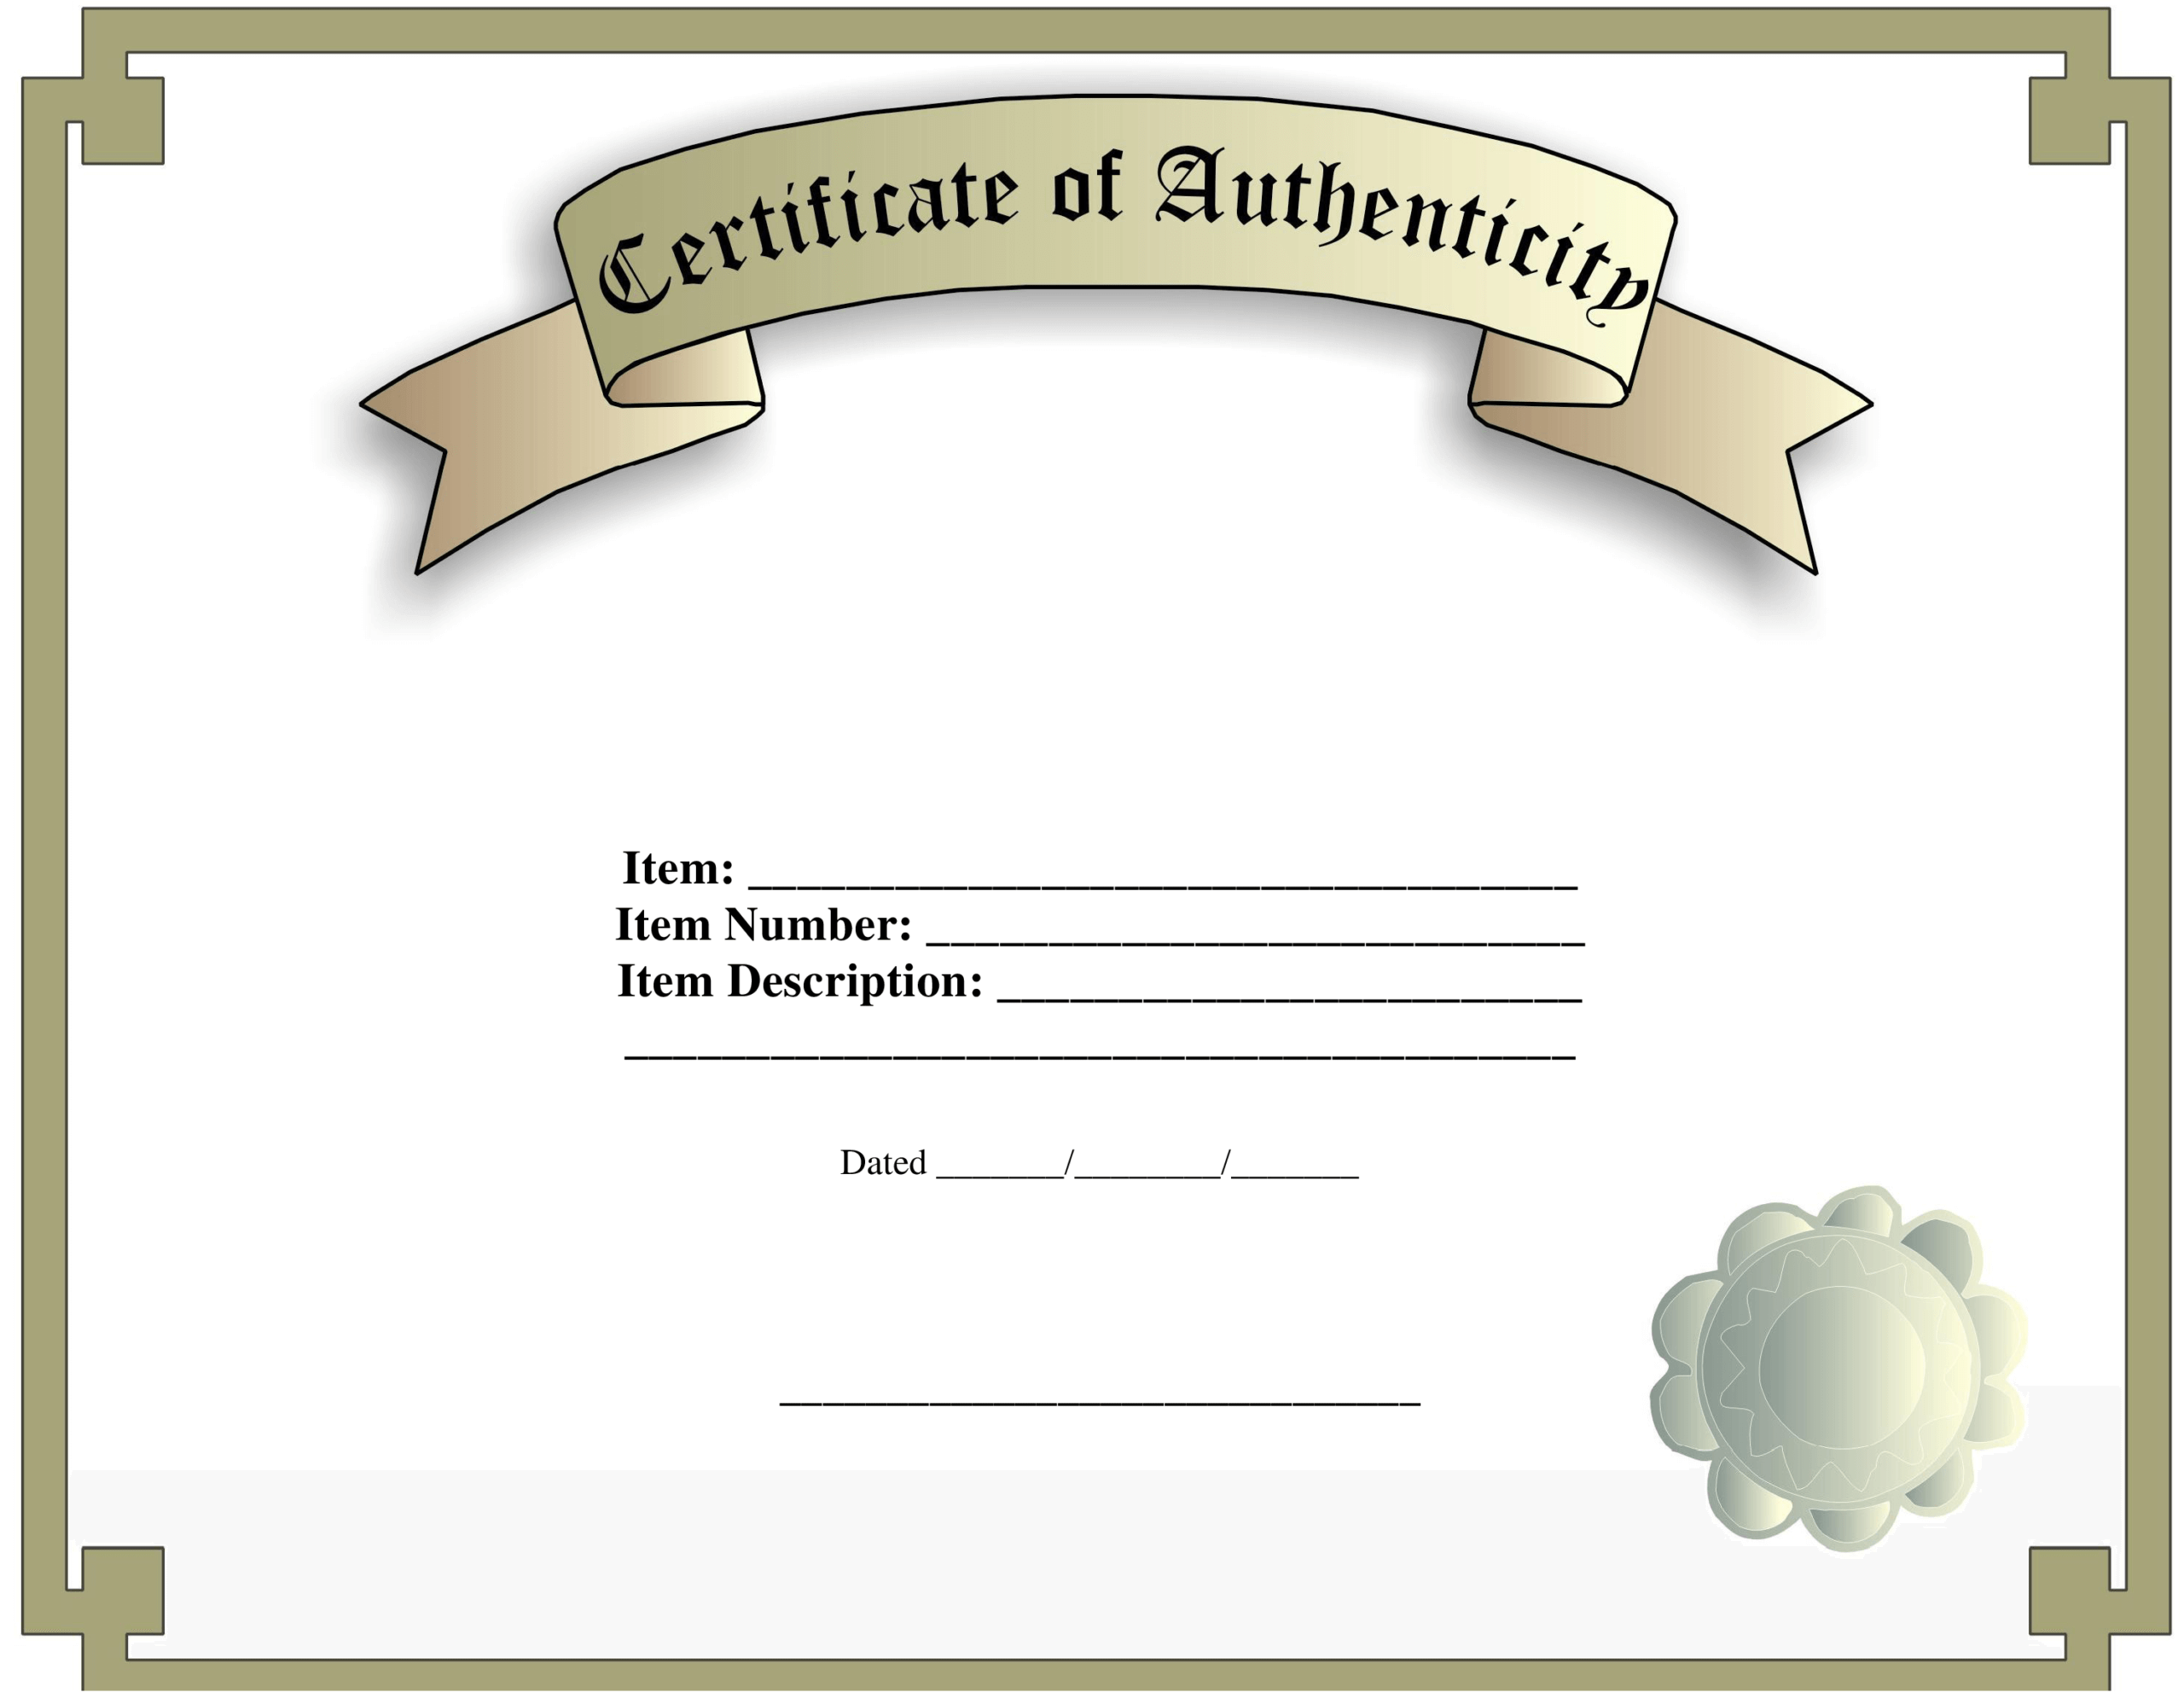 Certificate Of Authenticity Template | Templates At Pertaining To Certificate Of Authenticity Template